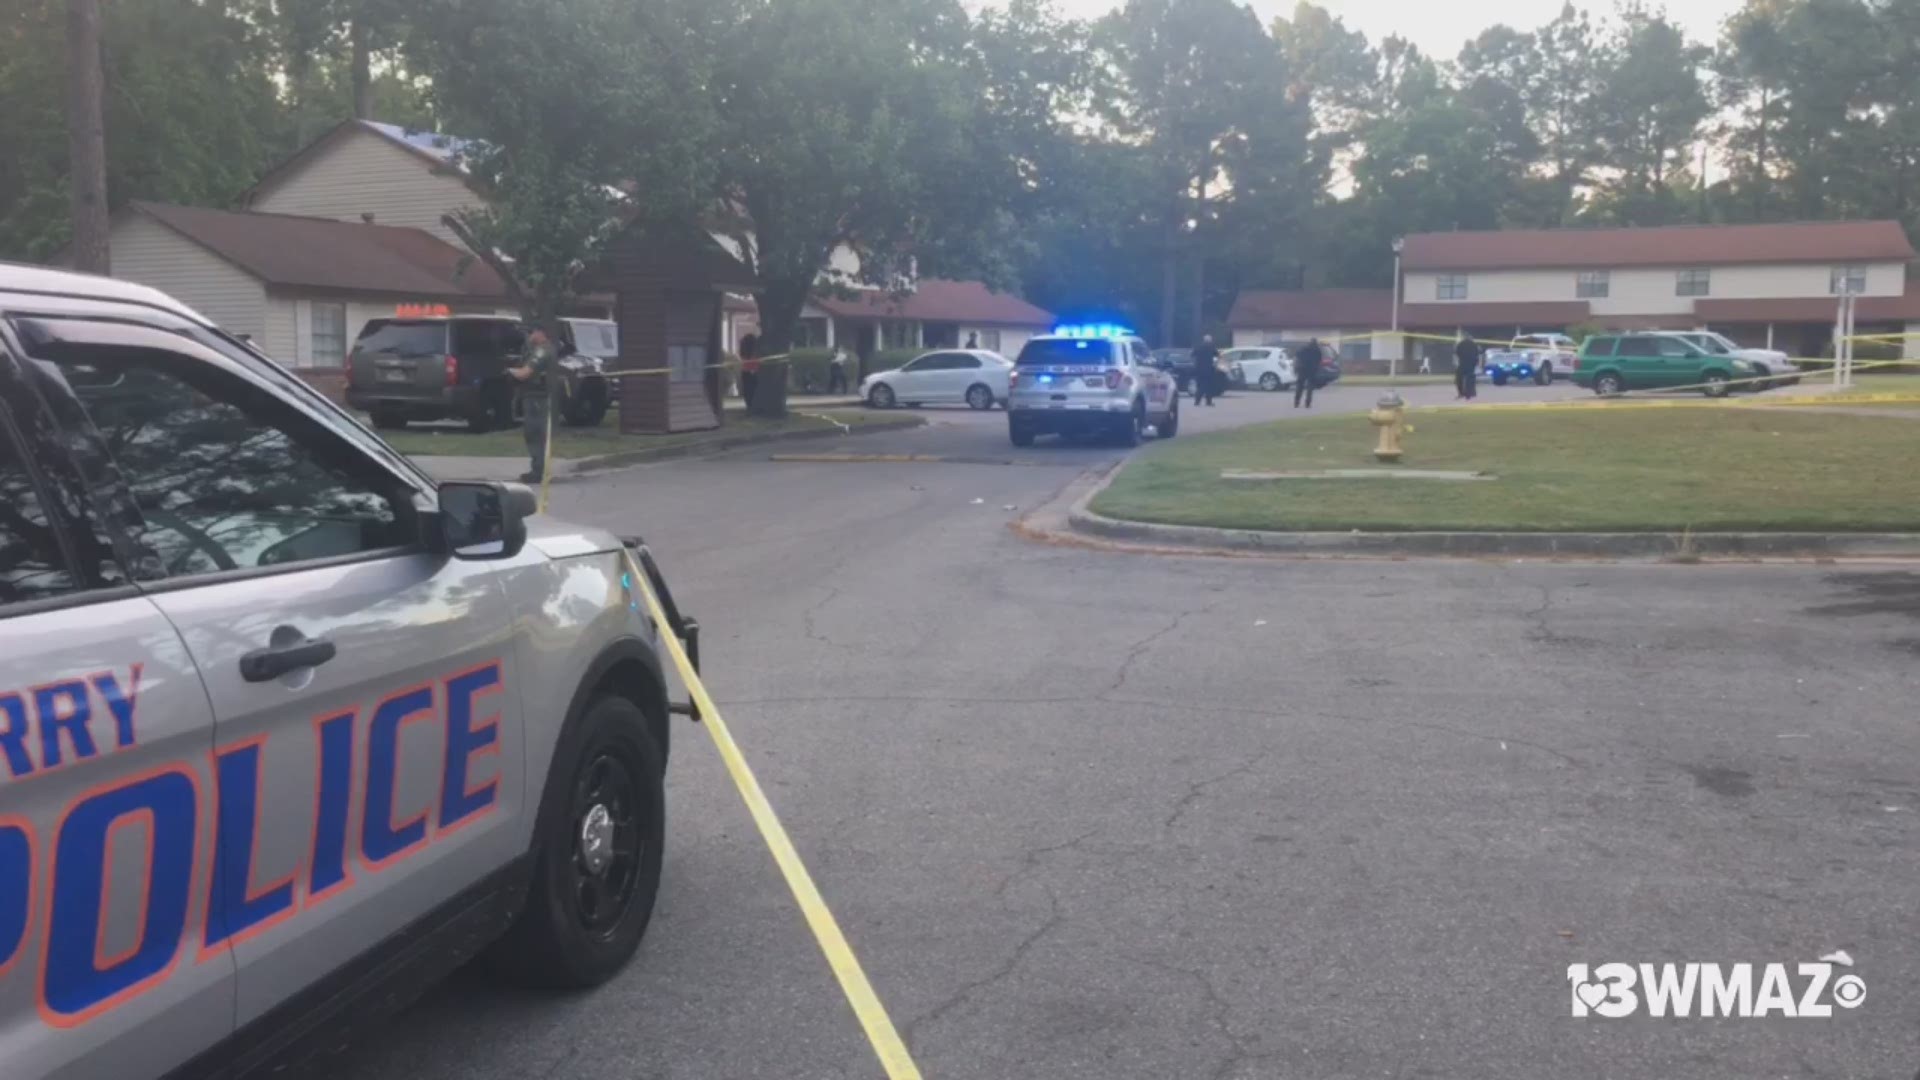 Captain Heath Dykes with the Perry Police Department says the shooting happened at the Kings Villas Apartments Sunday evening. He confirms one man was shot multiple times and passed away.